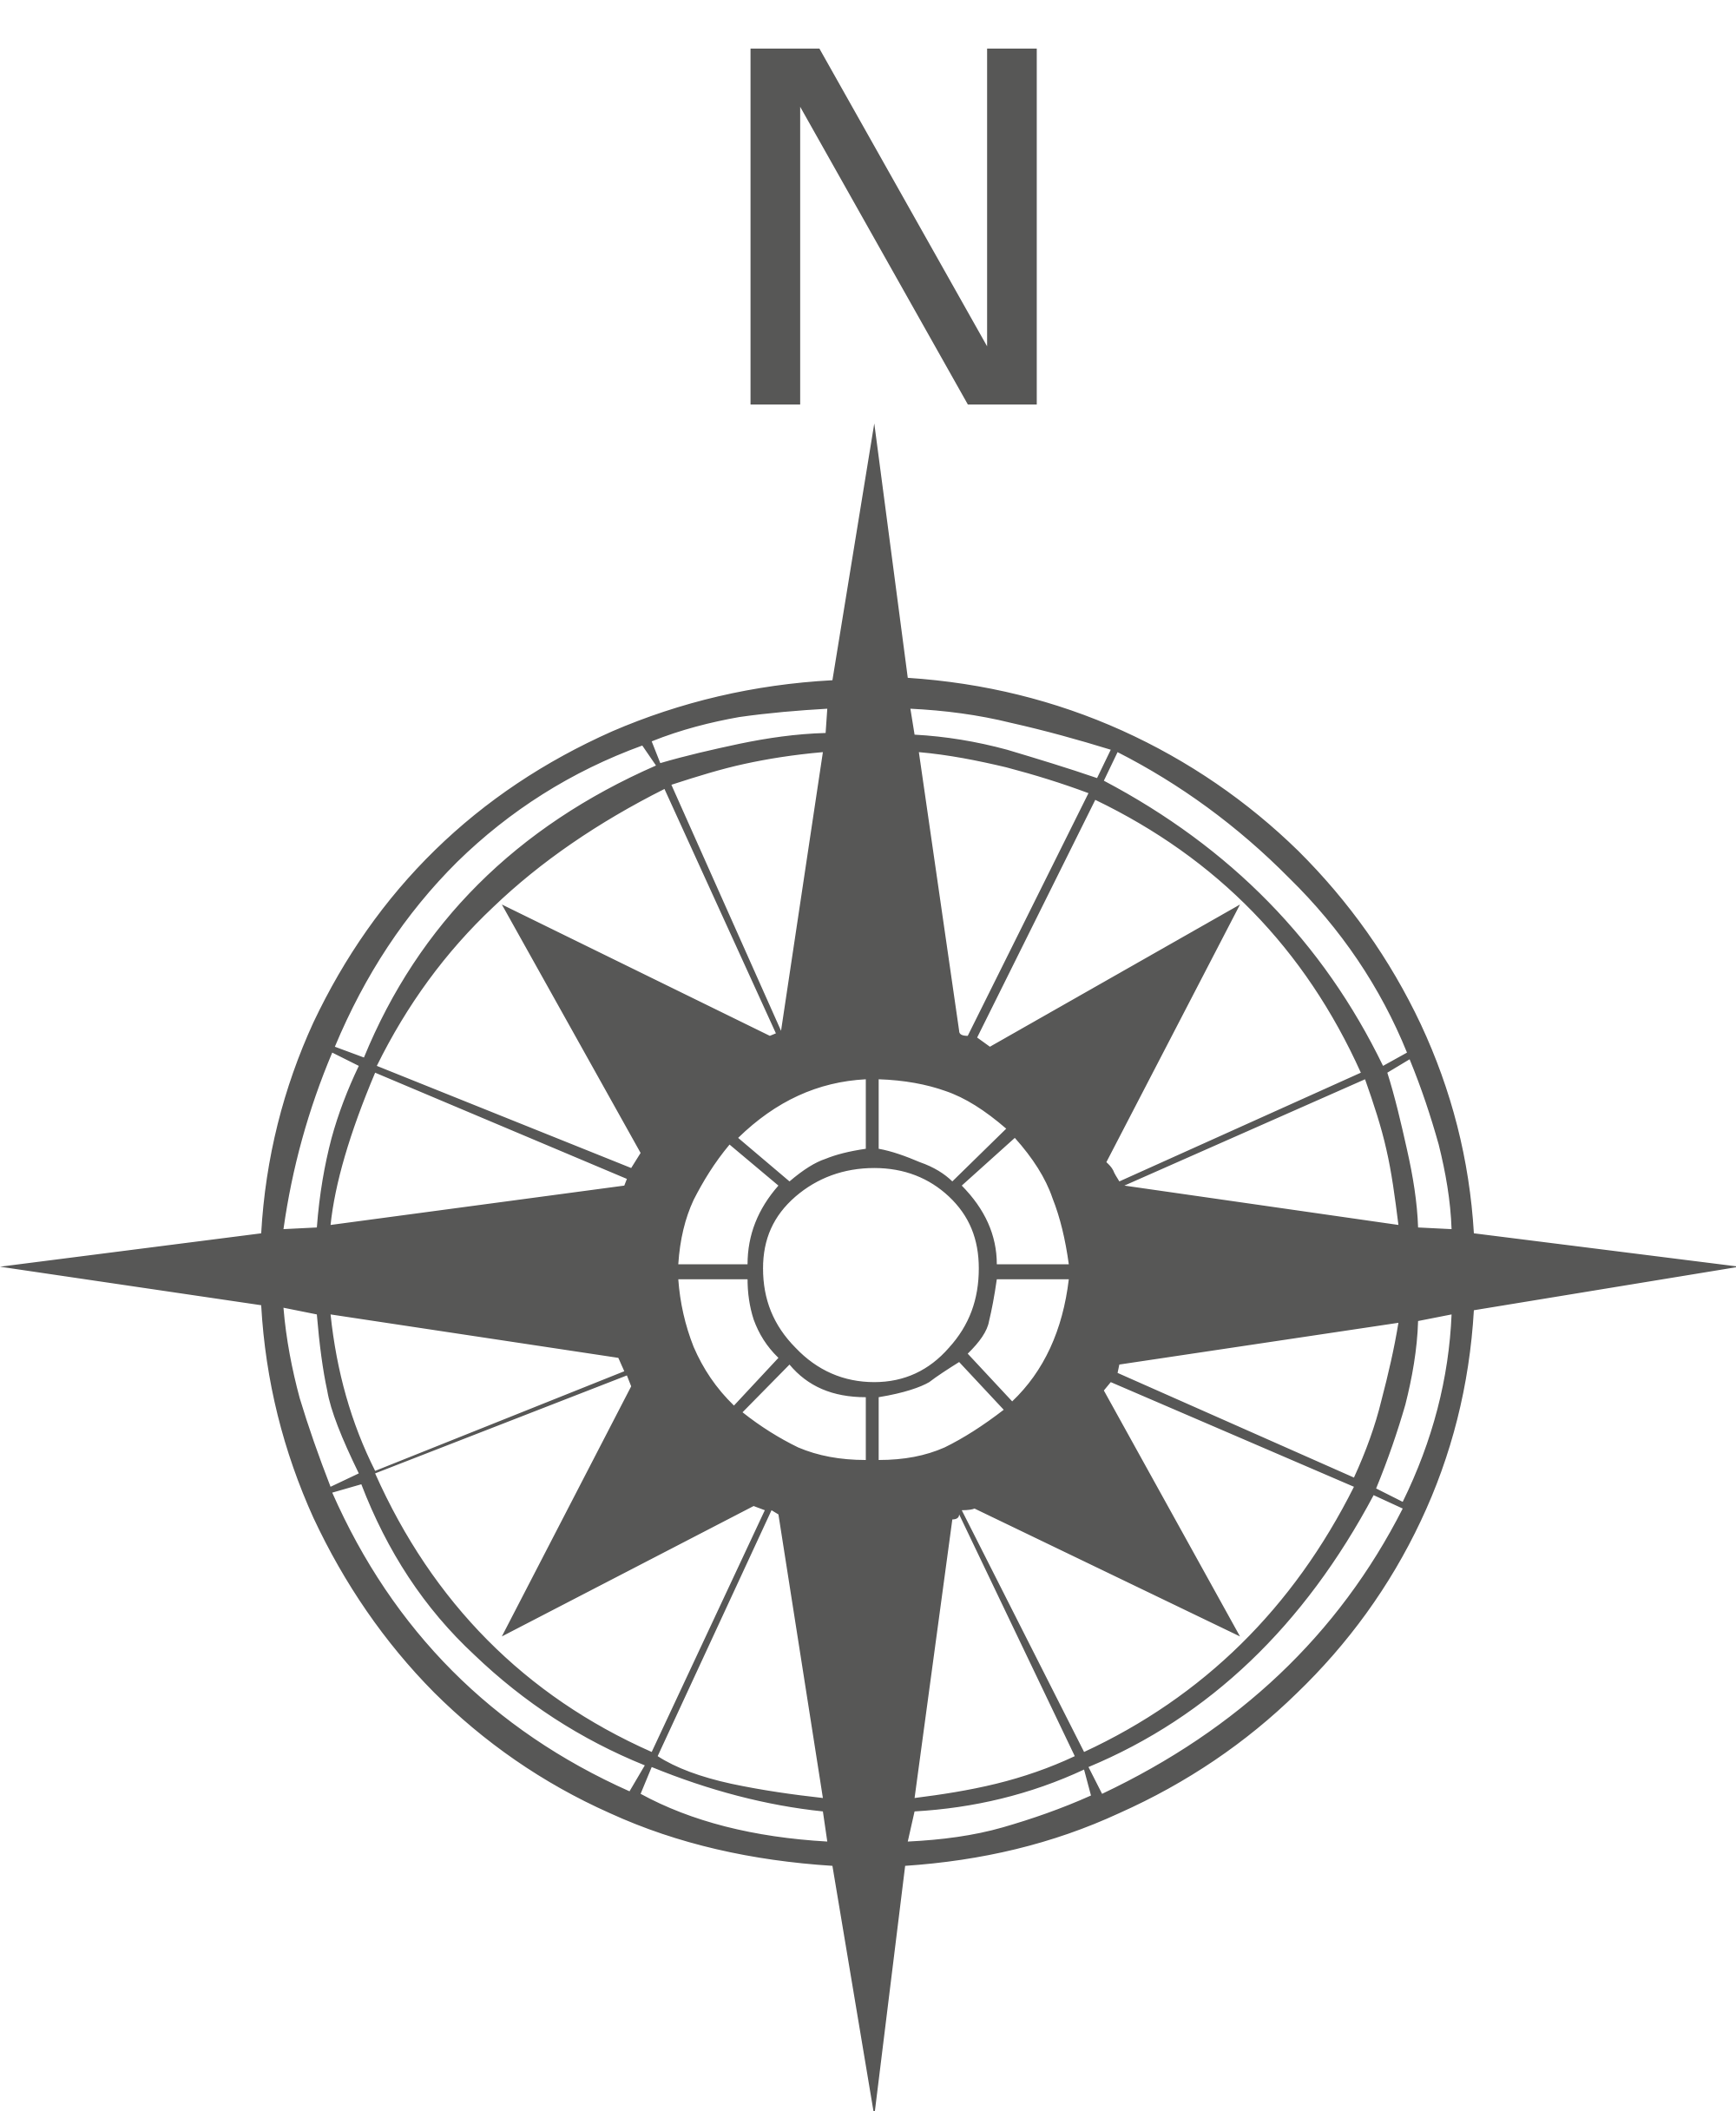 File:Gray compass rose.svg - Wikimedia Commons